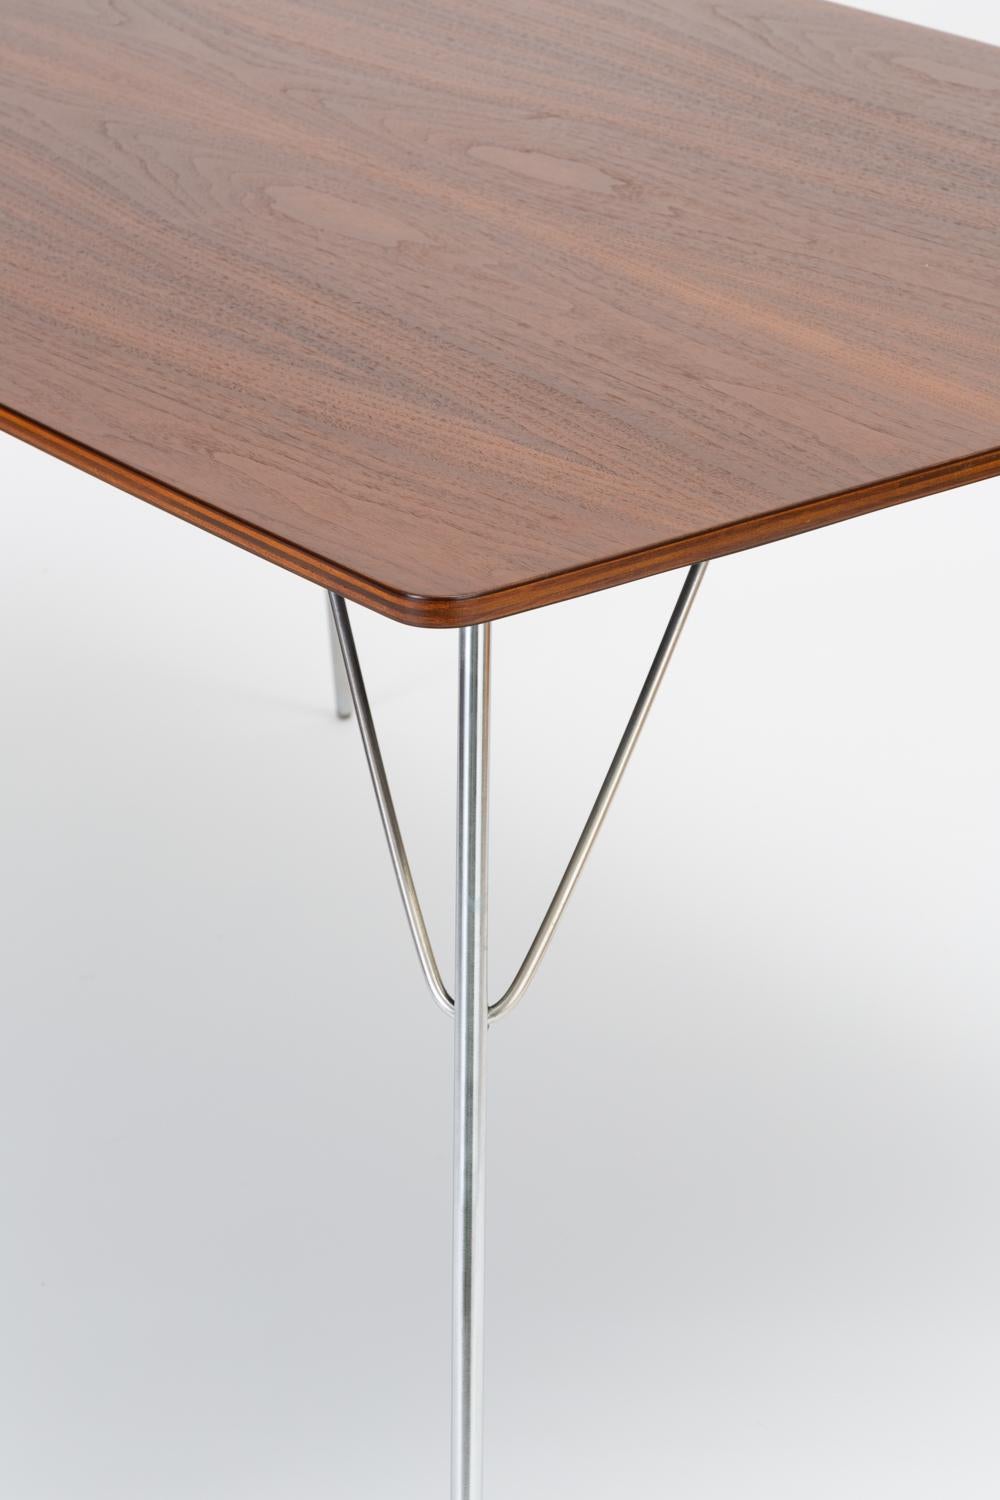 American Charles & Ray Eames DTM-1 Dining Table for Herman Miller